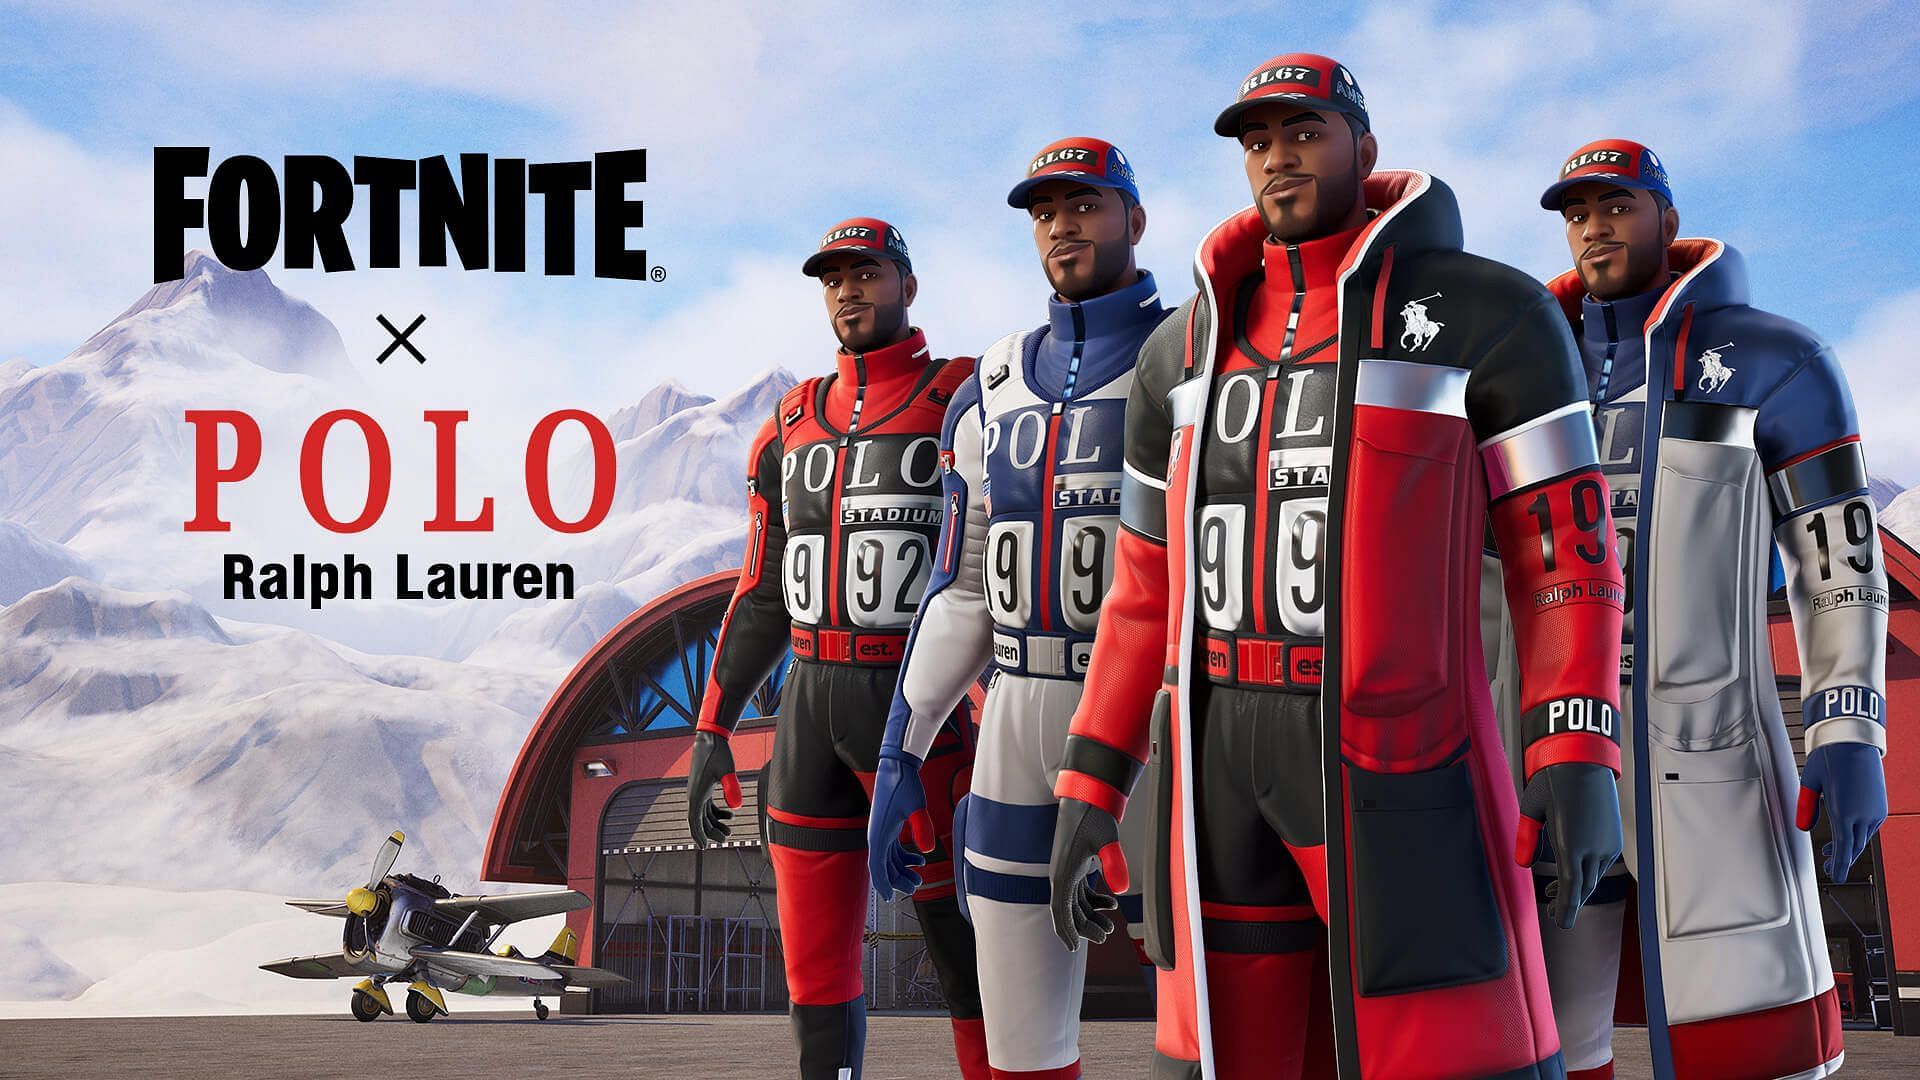 Fortnite x Polo (Ralph Lauren) collaboration Skins, release date, and